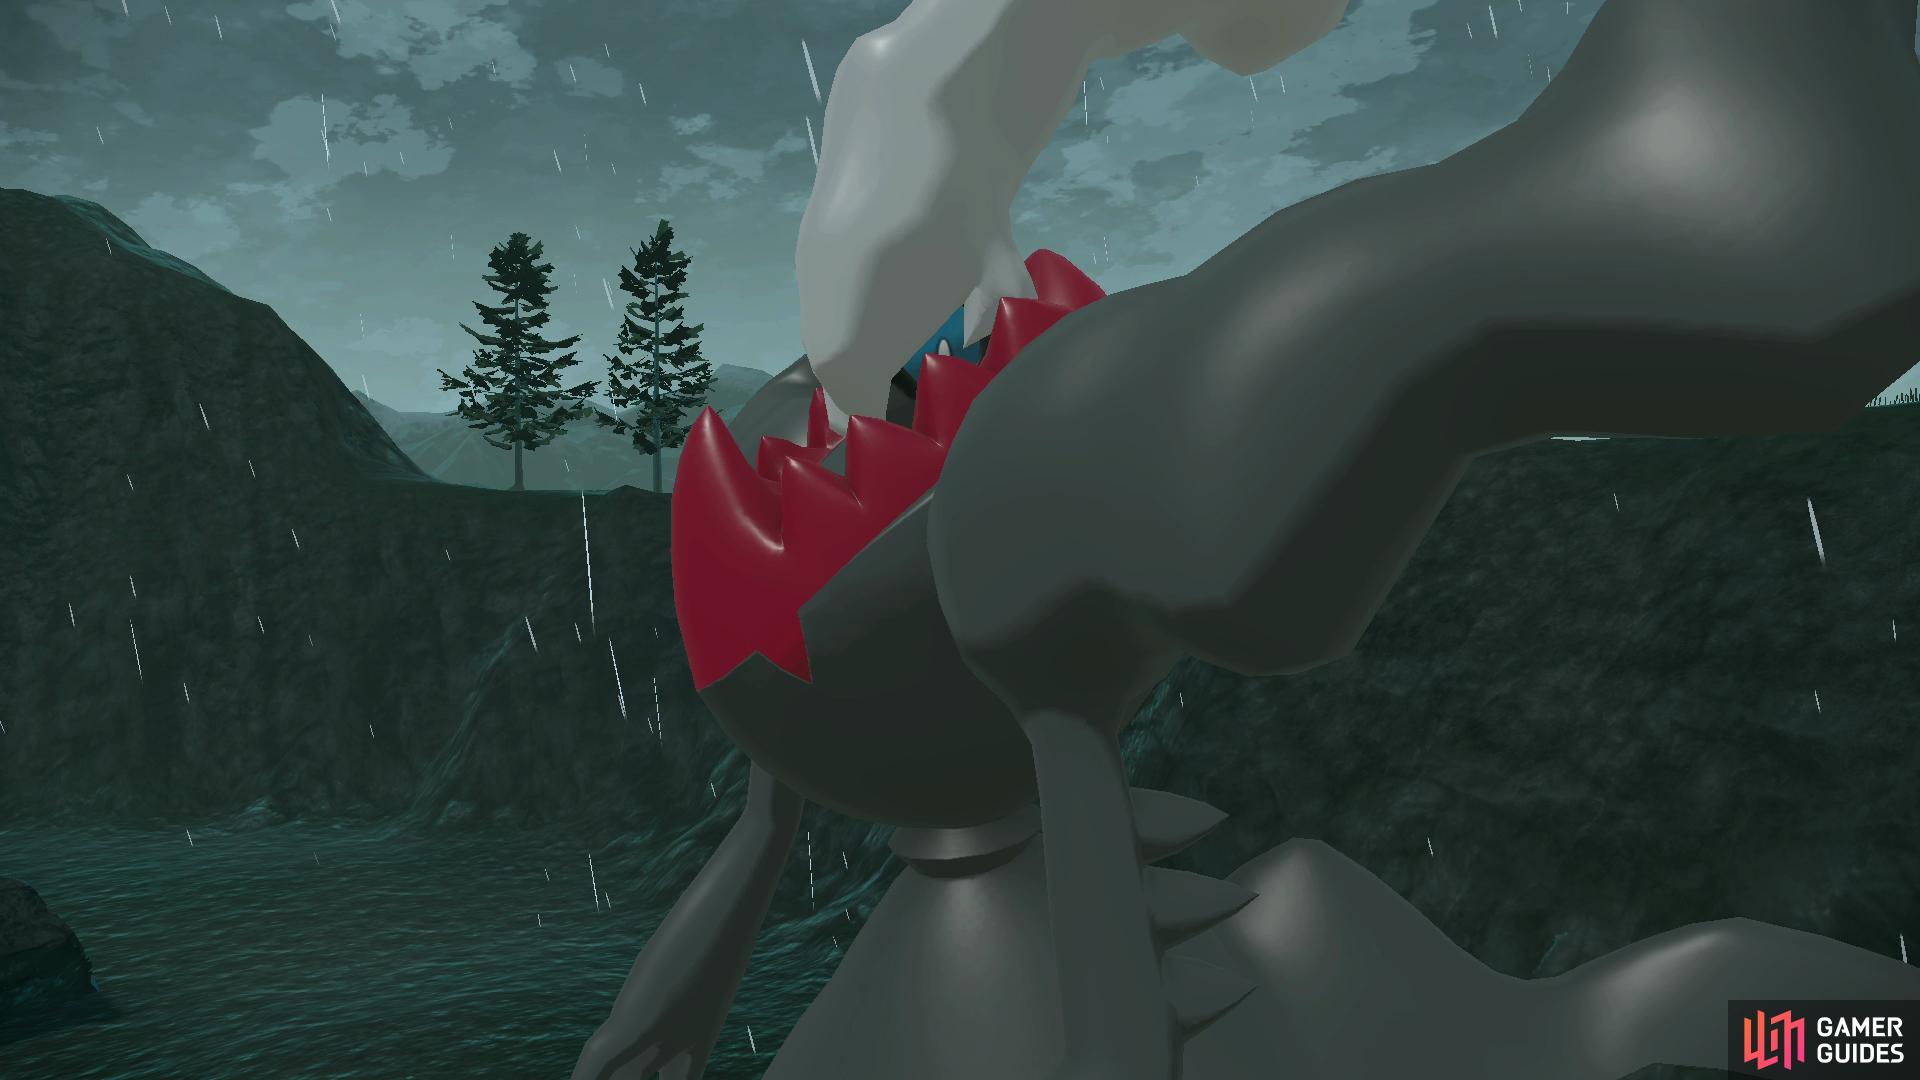 Darkrai can be found in the post-game so long as you have a save file from Pokémon Brilliant Diamond or Shining Pearl.